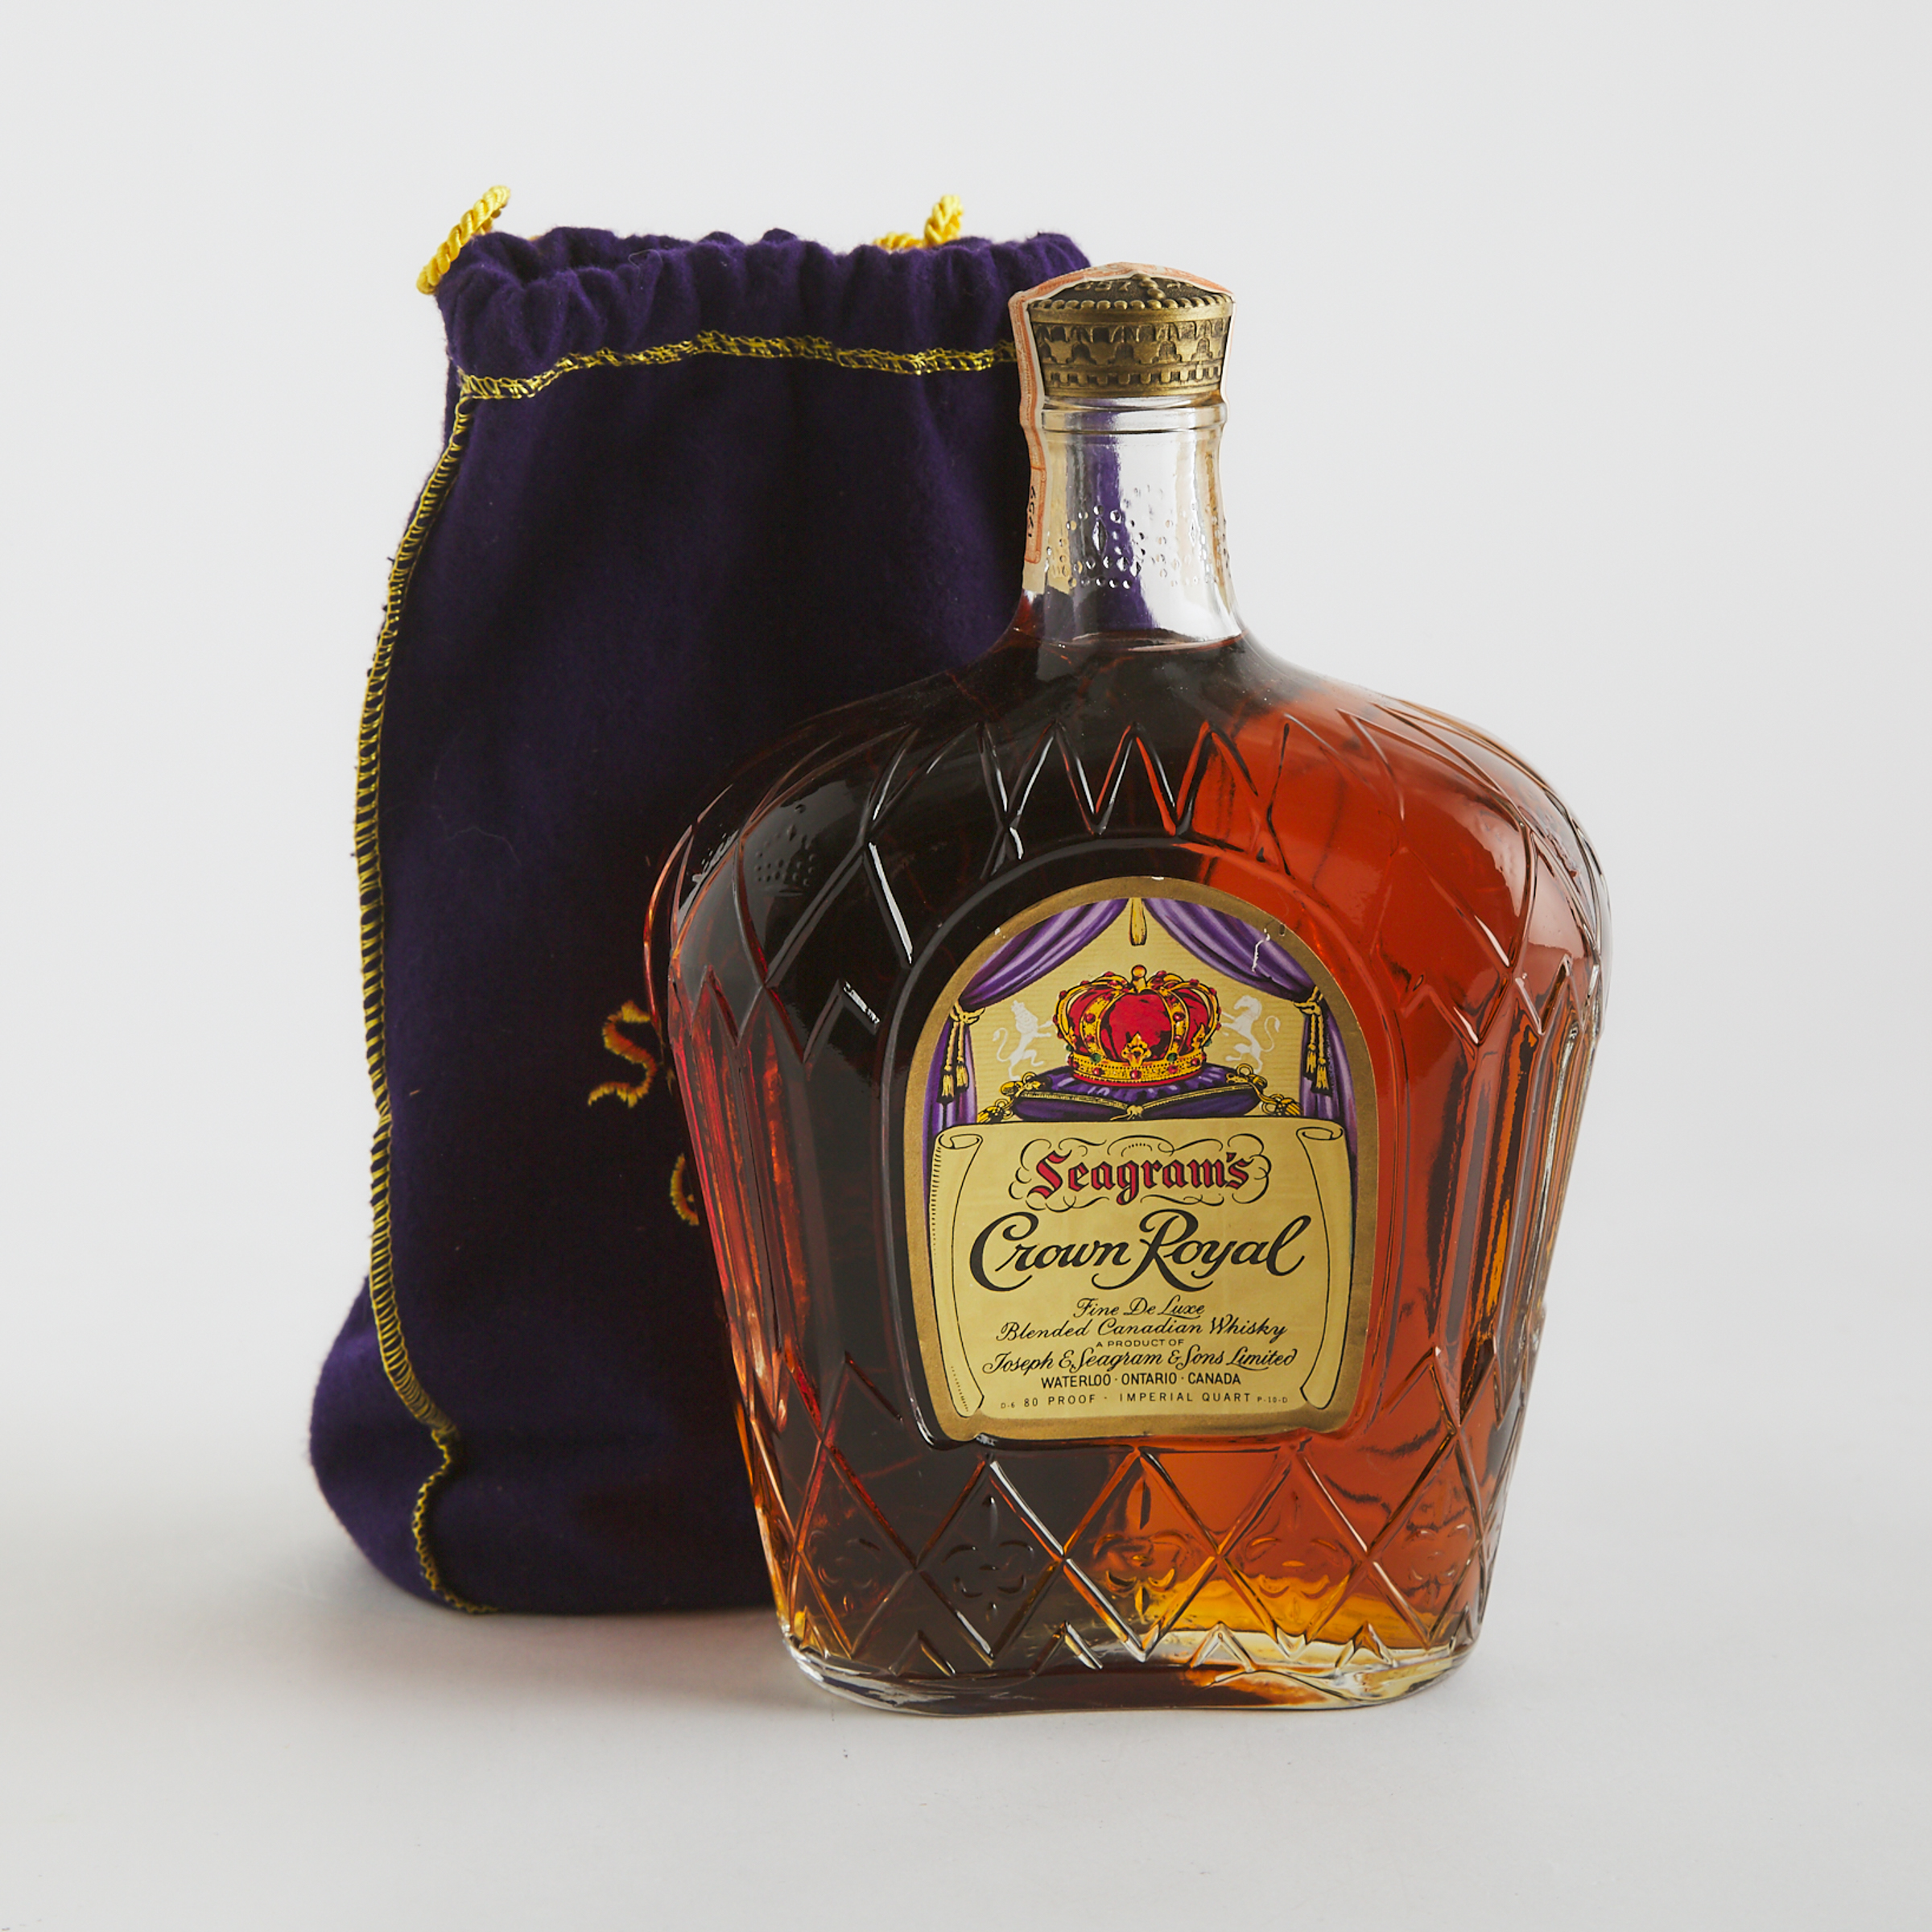 CROWN ROYAL DELUXE CANADIAN WHISKY (ONE 1 IMPERIAL QUART)